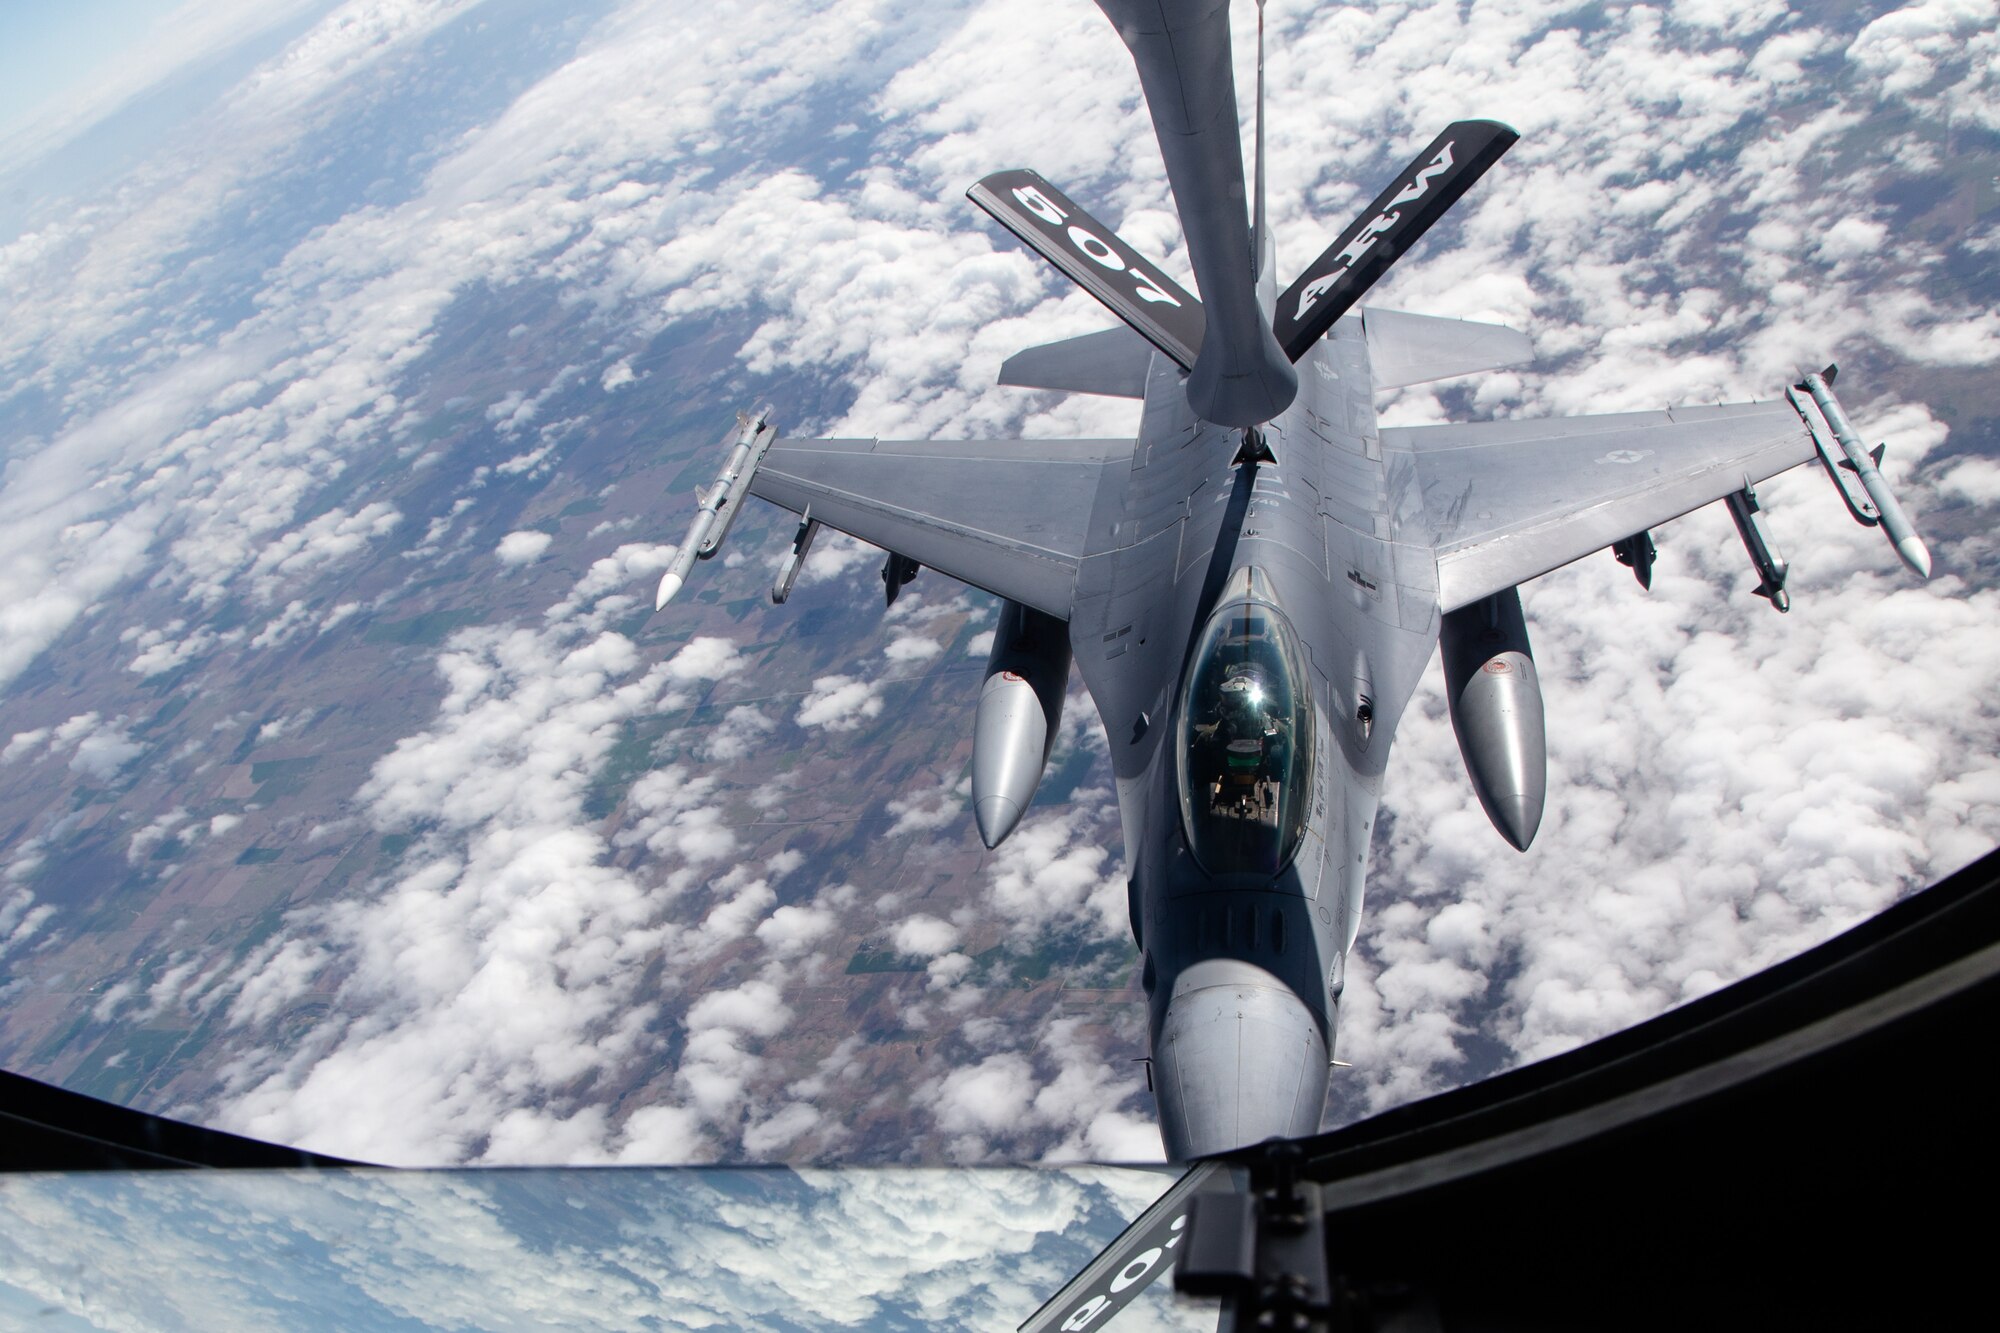 A 138th Fighter Wing F-16 Fighting Falcon from Tulsa Air National Guard Base, Oklahoma, refuels from a KC-135R Stratotanker April 25, 2019. The Stratotanker, from the 507th Air Refueling Wing at Tinker Air Force Base, Oklahoma, refueled four 138th Fighter Wing F-16 Fighting Falcons during flight operations over Kansas. (Courtesy photo by Mike Killian)